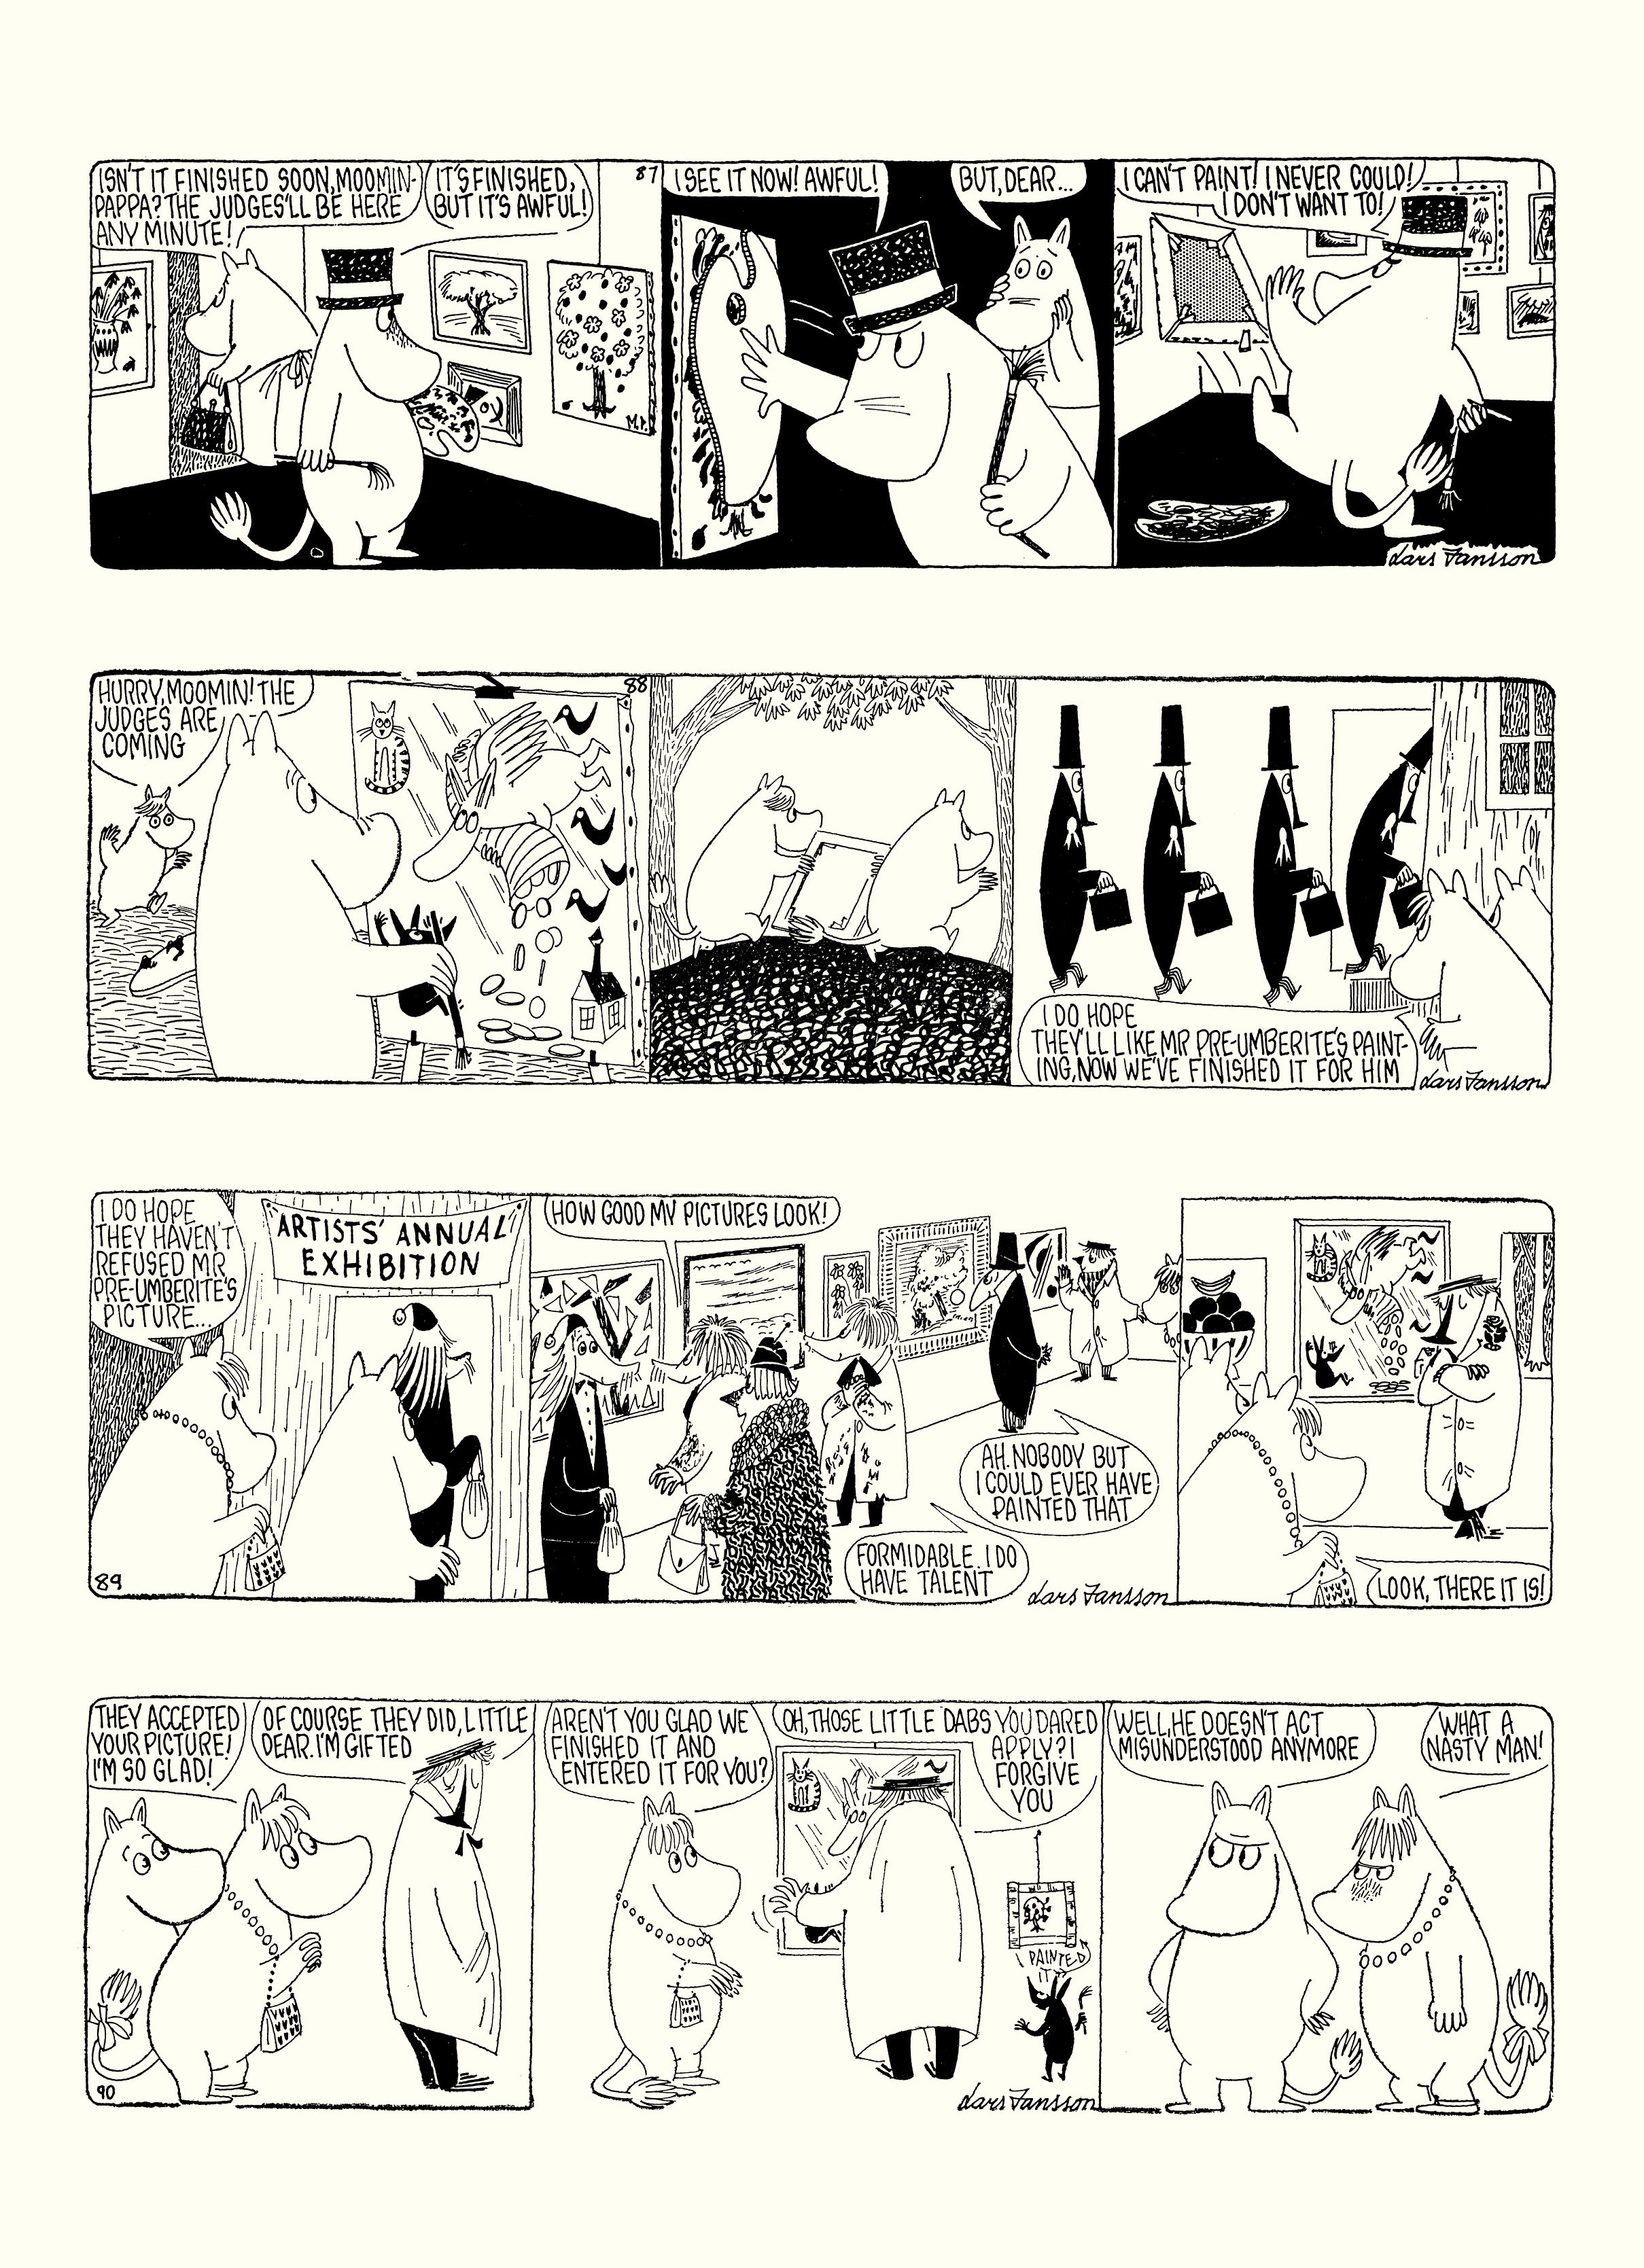 Read online Moomin: The Complete Lars Jansson Comic Strip comic -  Issue # TPB 8 - 49